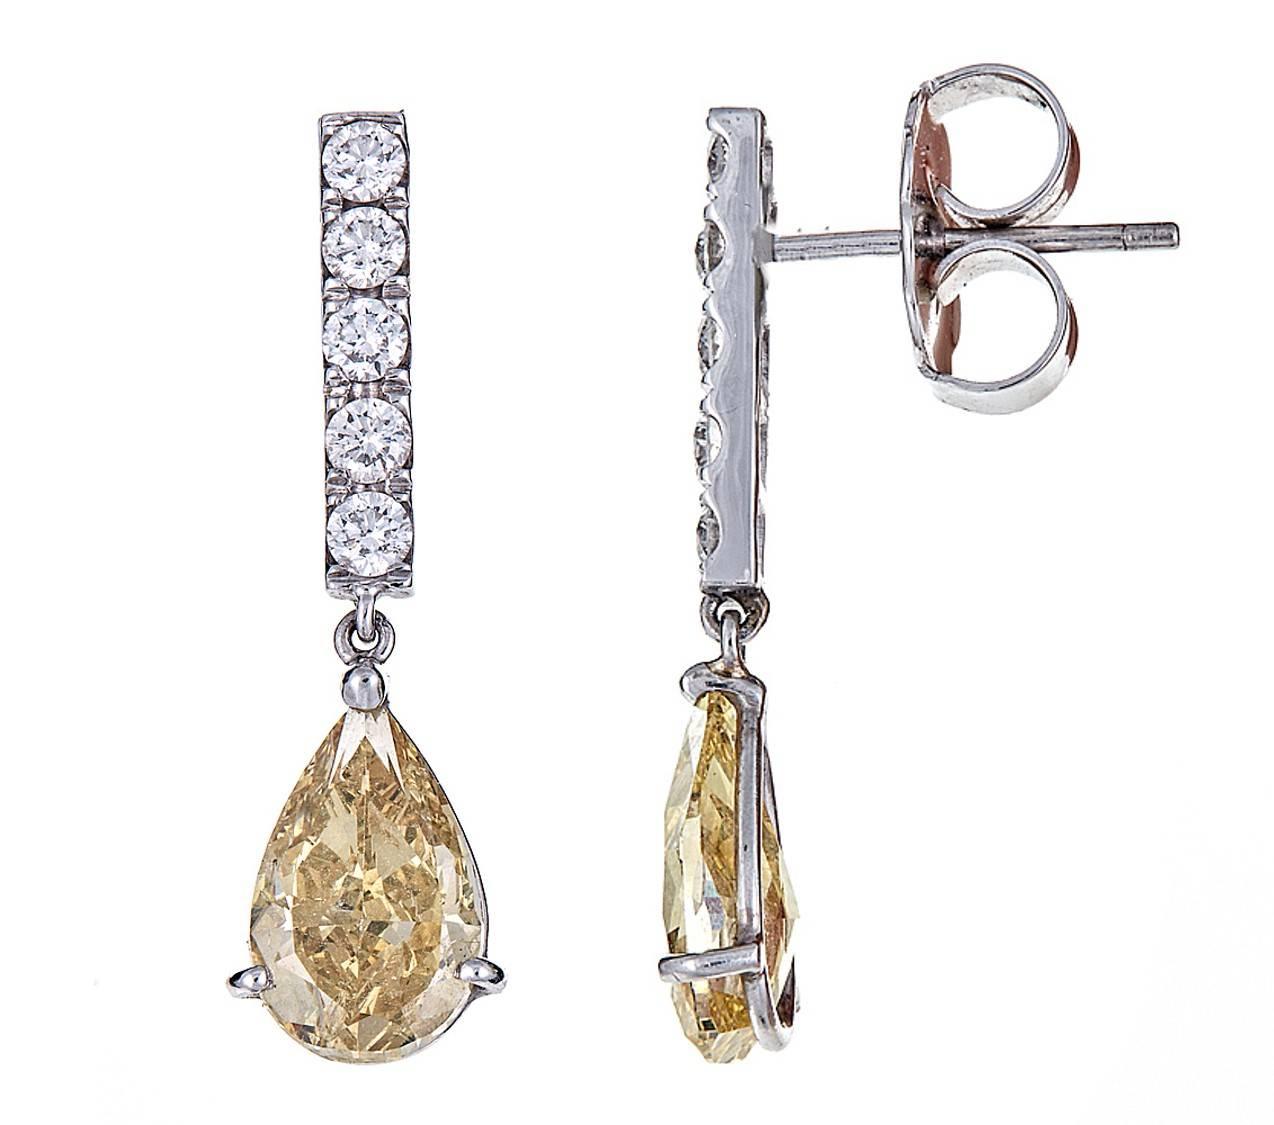 A pair of beautifully crafted 18k white gold earrings. 
1.16 carats of round white diamonds set the stage for two magnificent, pear shaped, fancy brown/yellow and yellow diamond drops.
Each diamond drop respectively weights 2.03 and 2.01 carats.